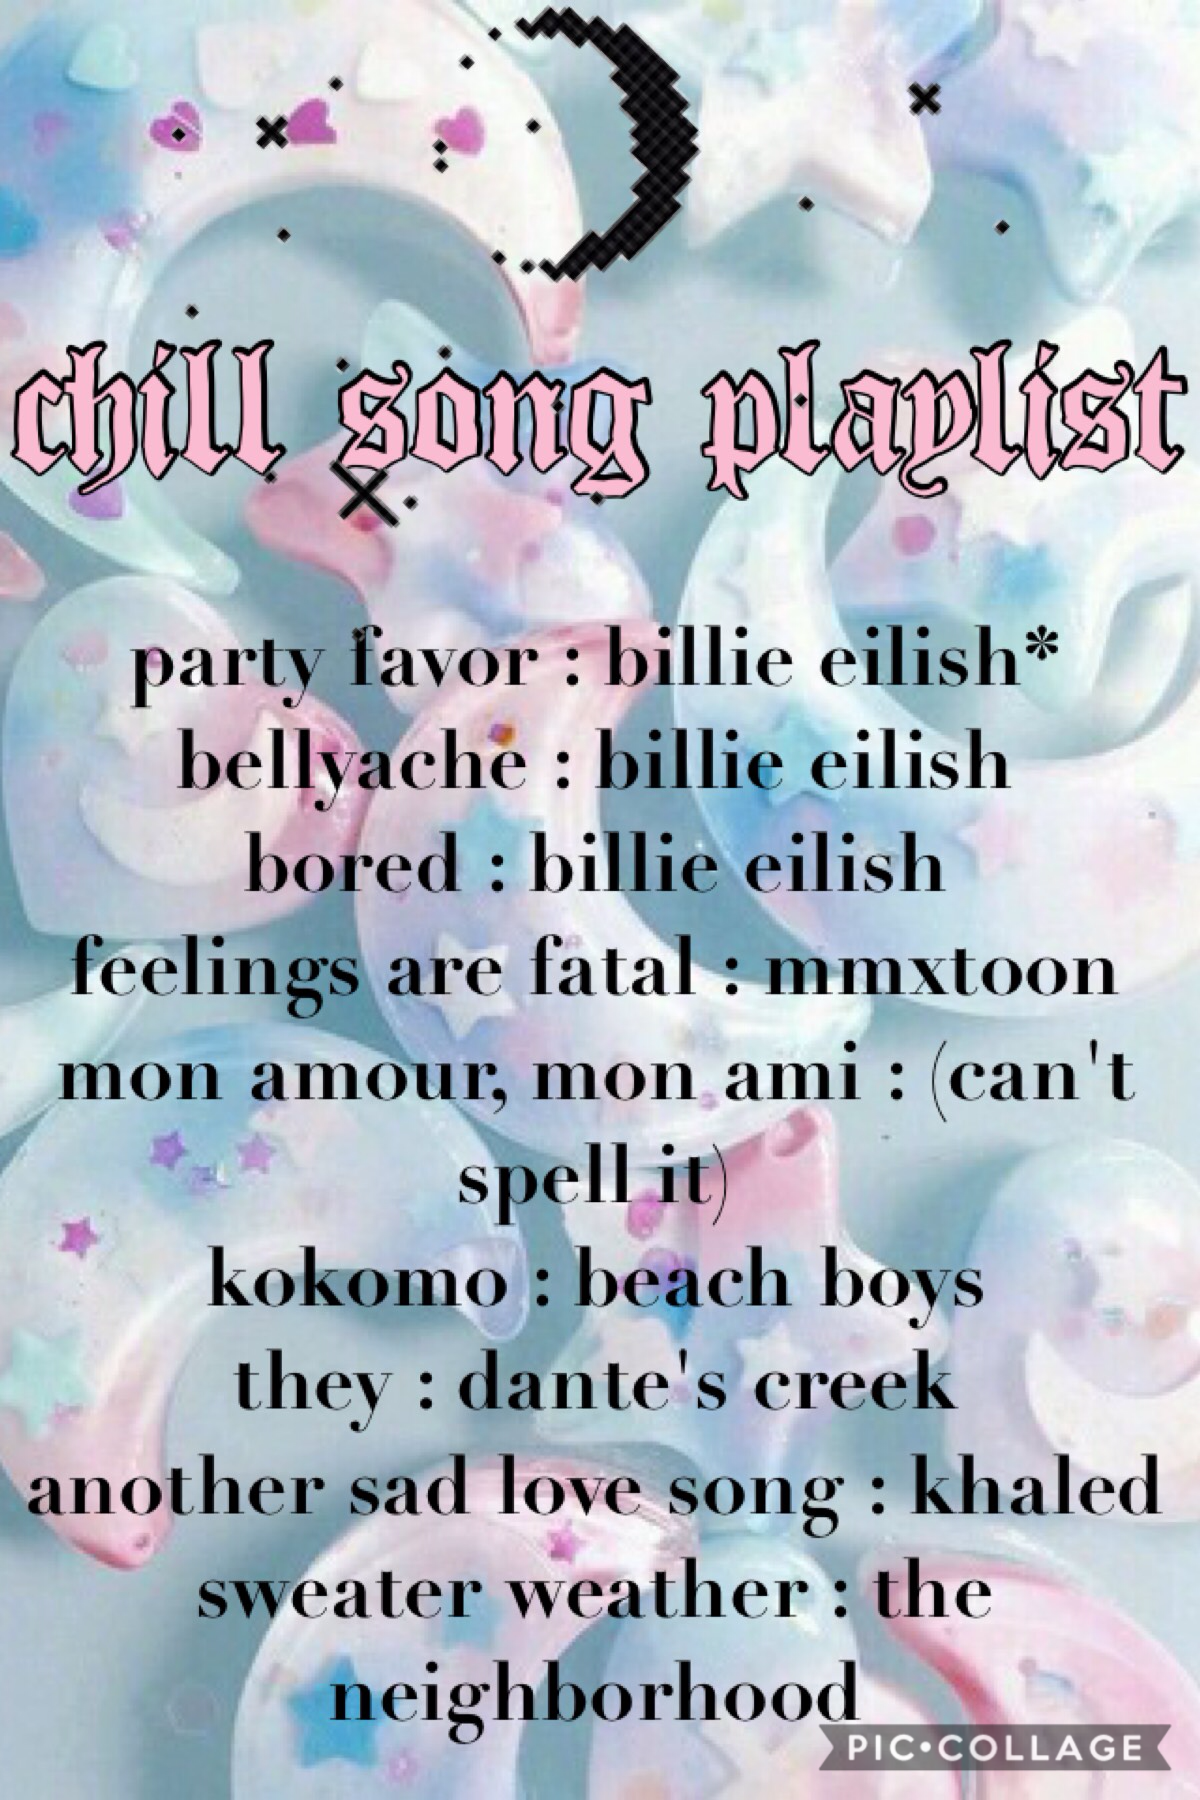 ☄ tap for more ☄
the * means that party favor is slightly explicit, sorry. these are some of my favorite songs, and they're all pretty dang chill! have an amazing day, and i love you all! <3 <3 <3